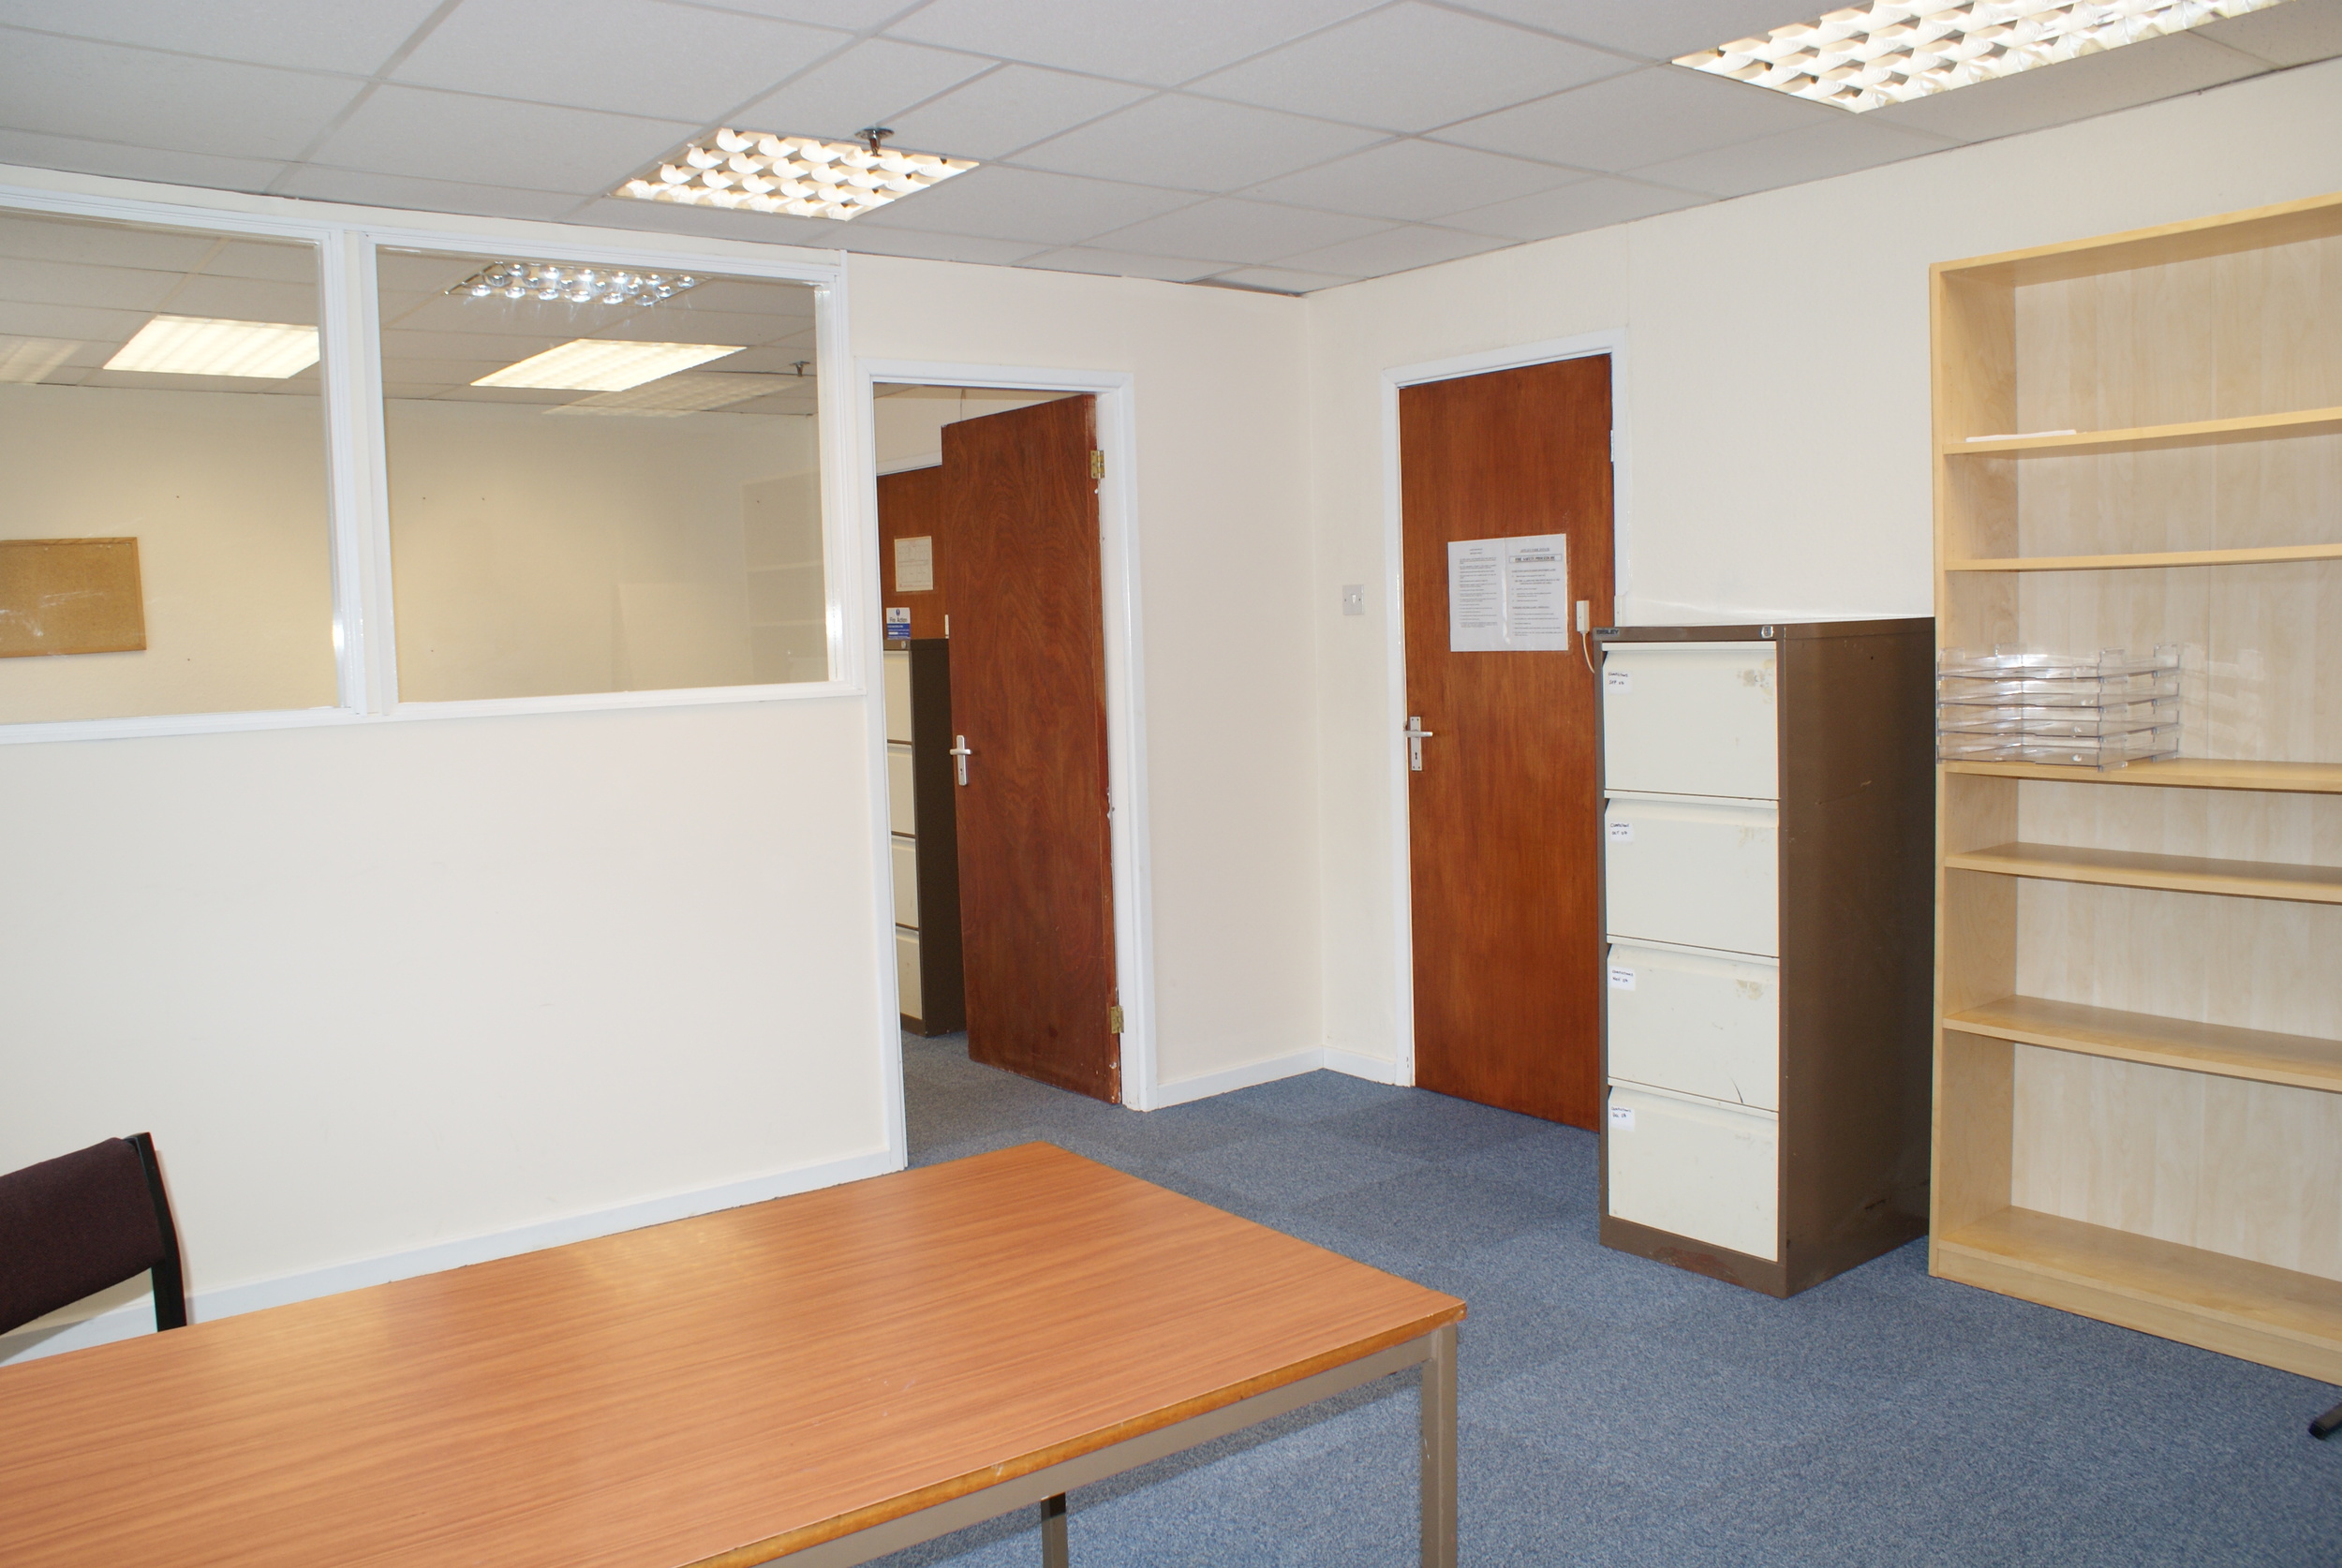   Serviced Offices To Let   Astley, Manchester 